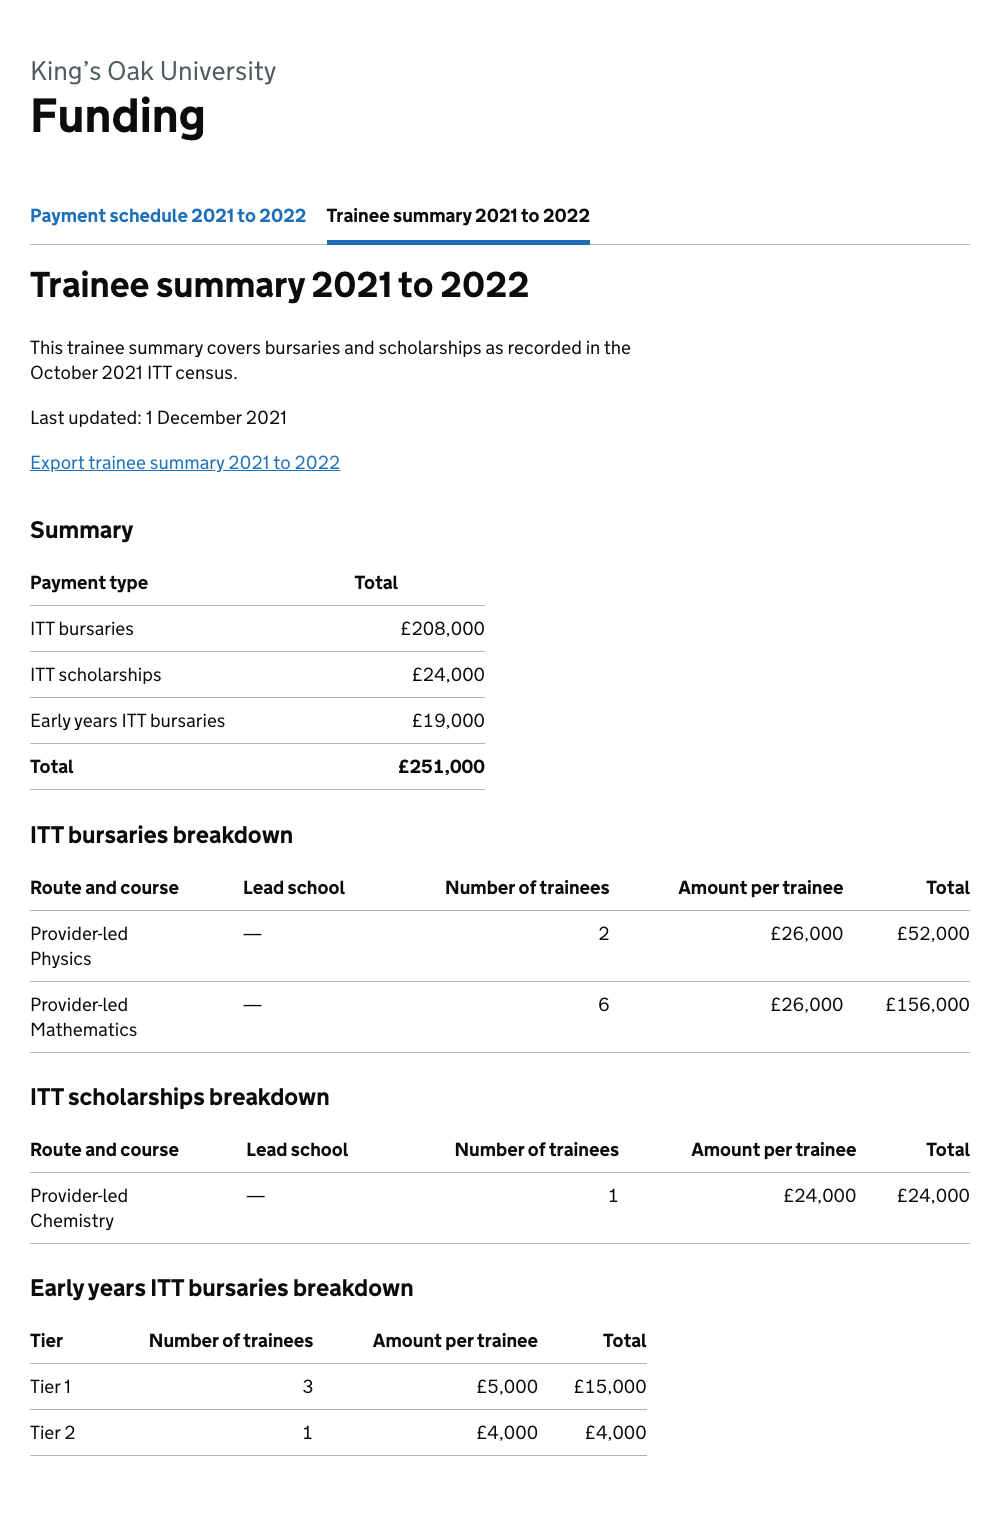 Summary of trainee payments.